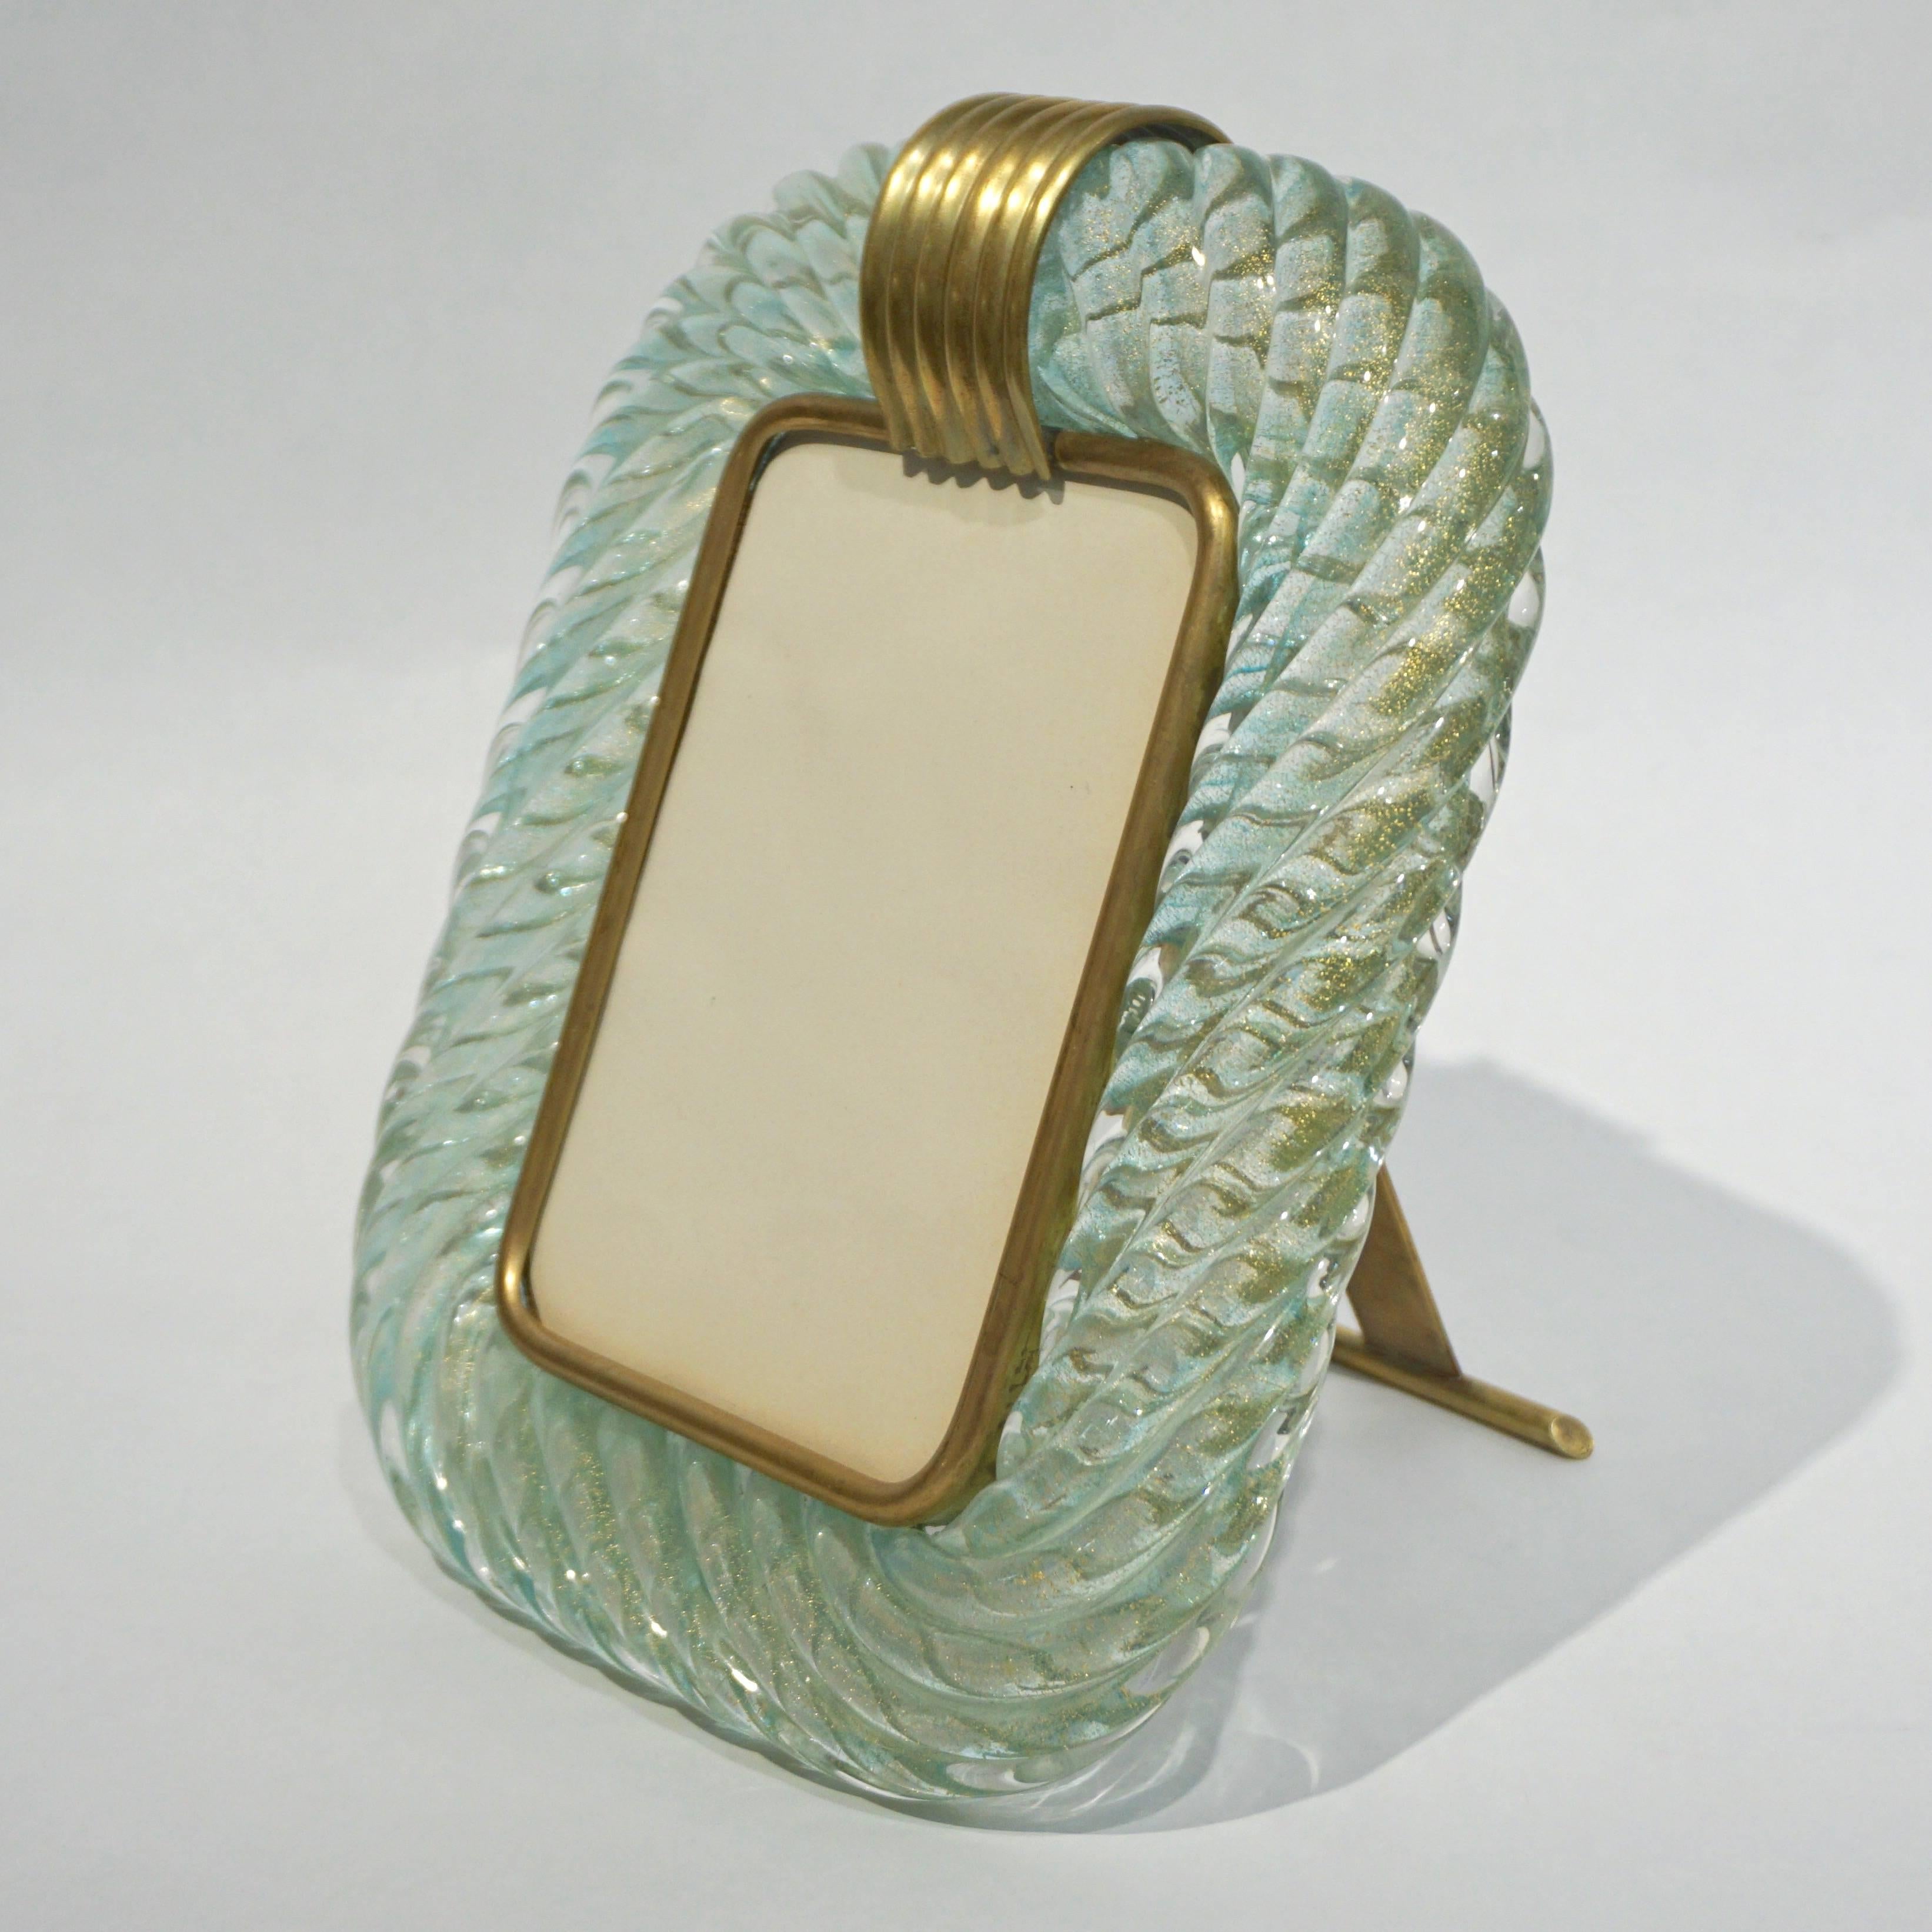 1970s vintage Murano glass picture frame worked with organic “torchon”: handcrafted twisted blown Murano glass, in an unusual green cyan / teal tint, preciously decorated with pure gold in the glass that confers a glow throughout, enhanced by the